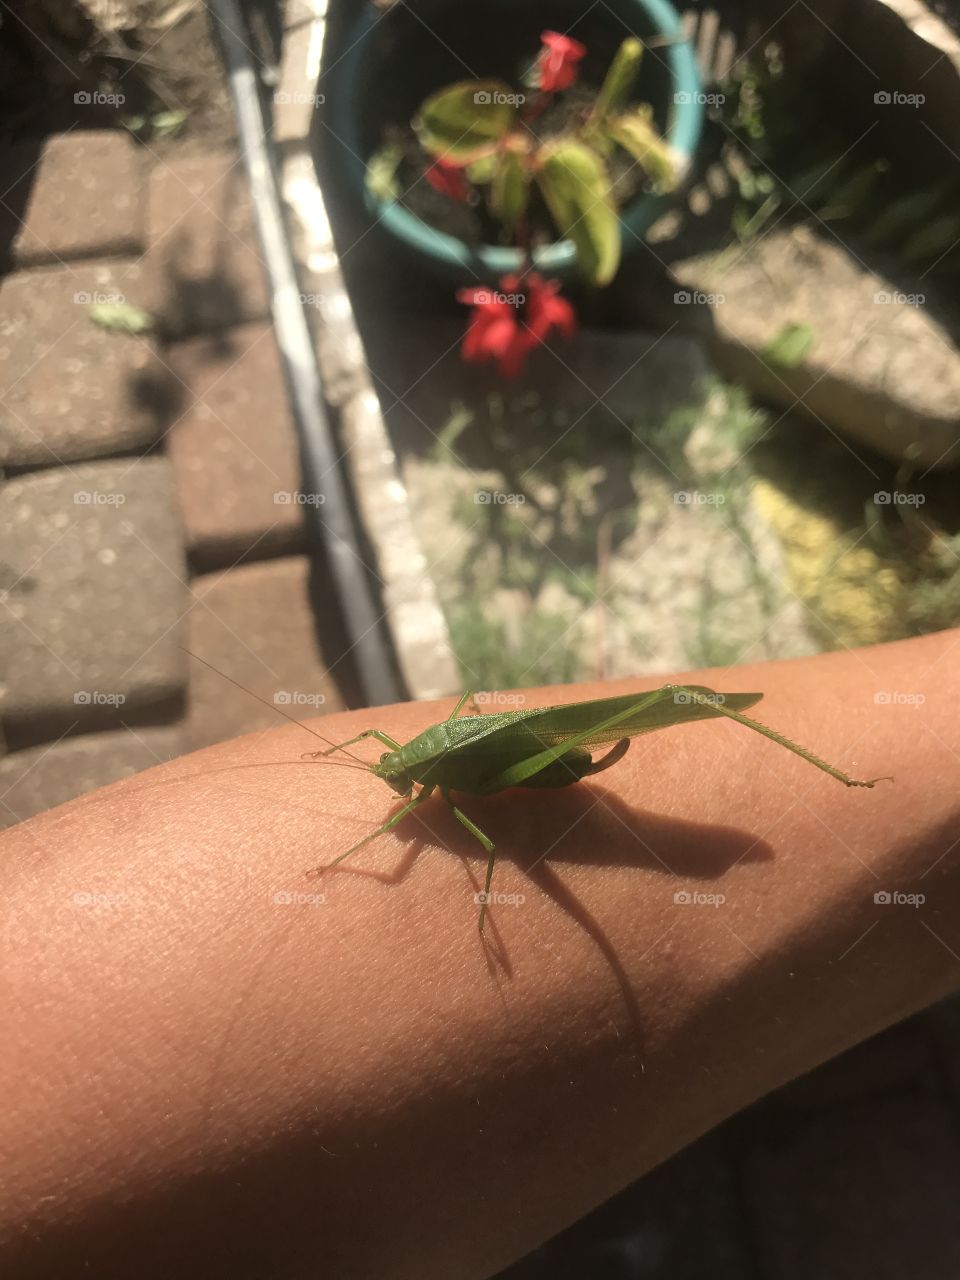 3legged grasshopper hanging out on the arm of his new friend 